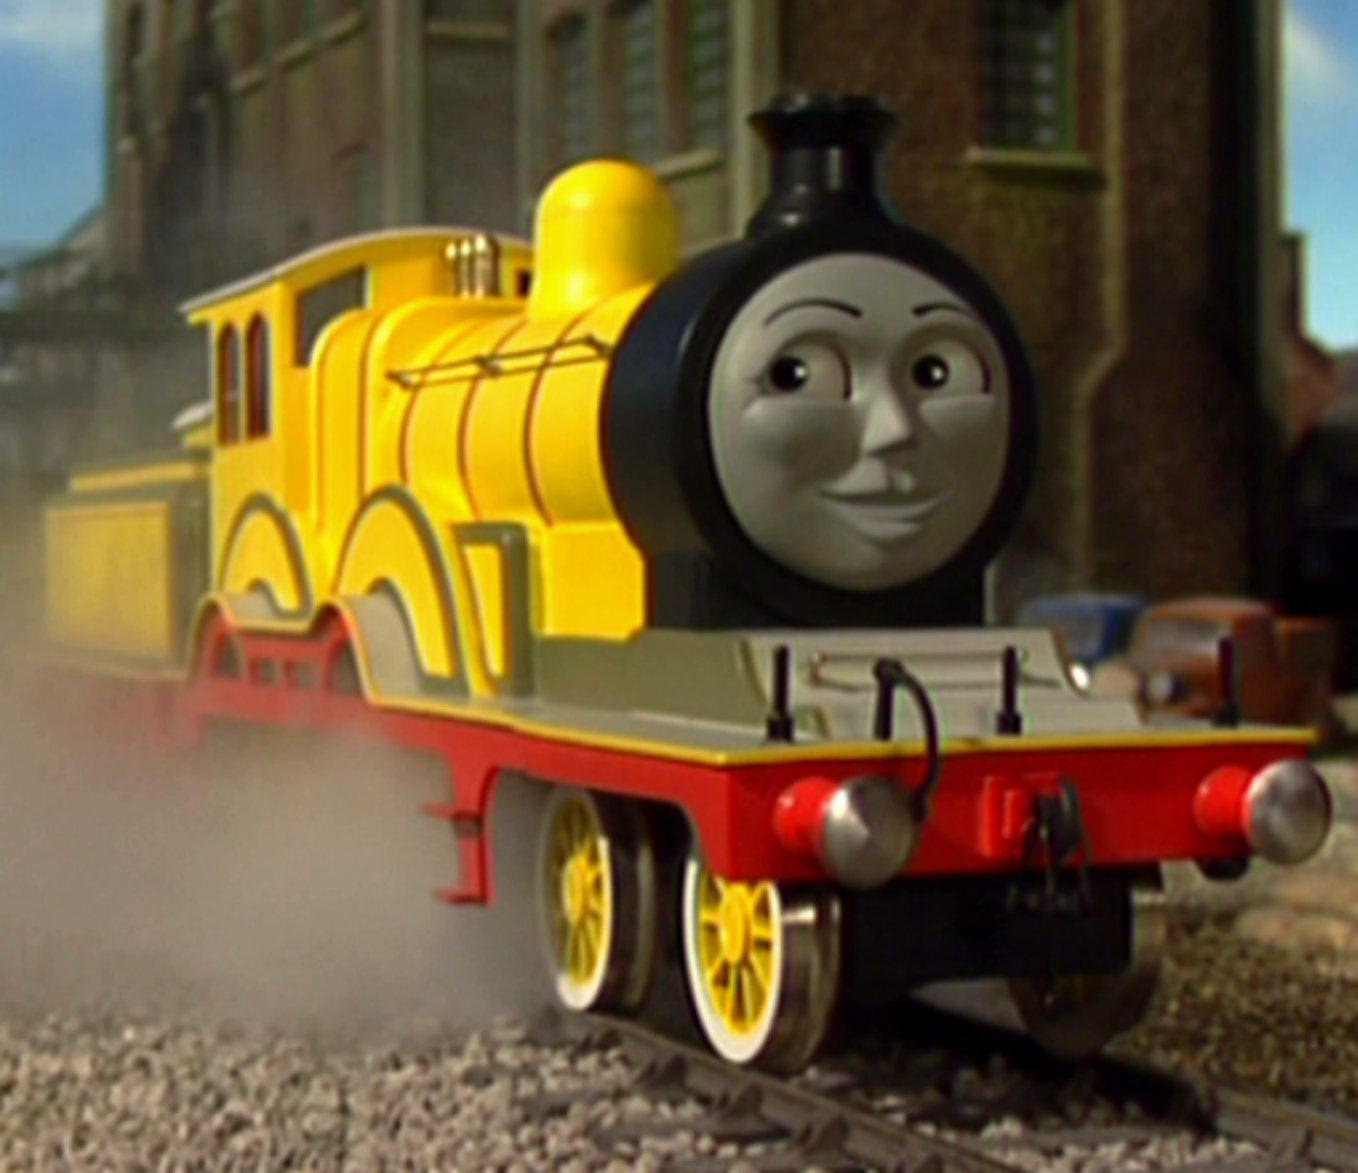 Toy cast iron train models of Molly (yellow) and Rosie (pink) from